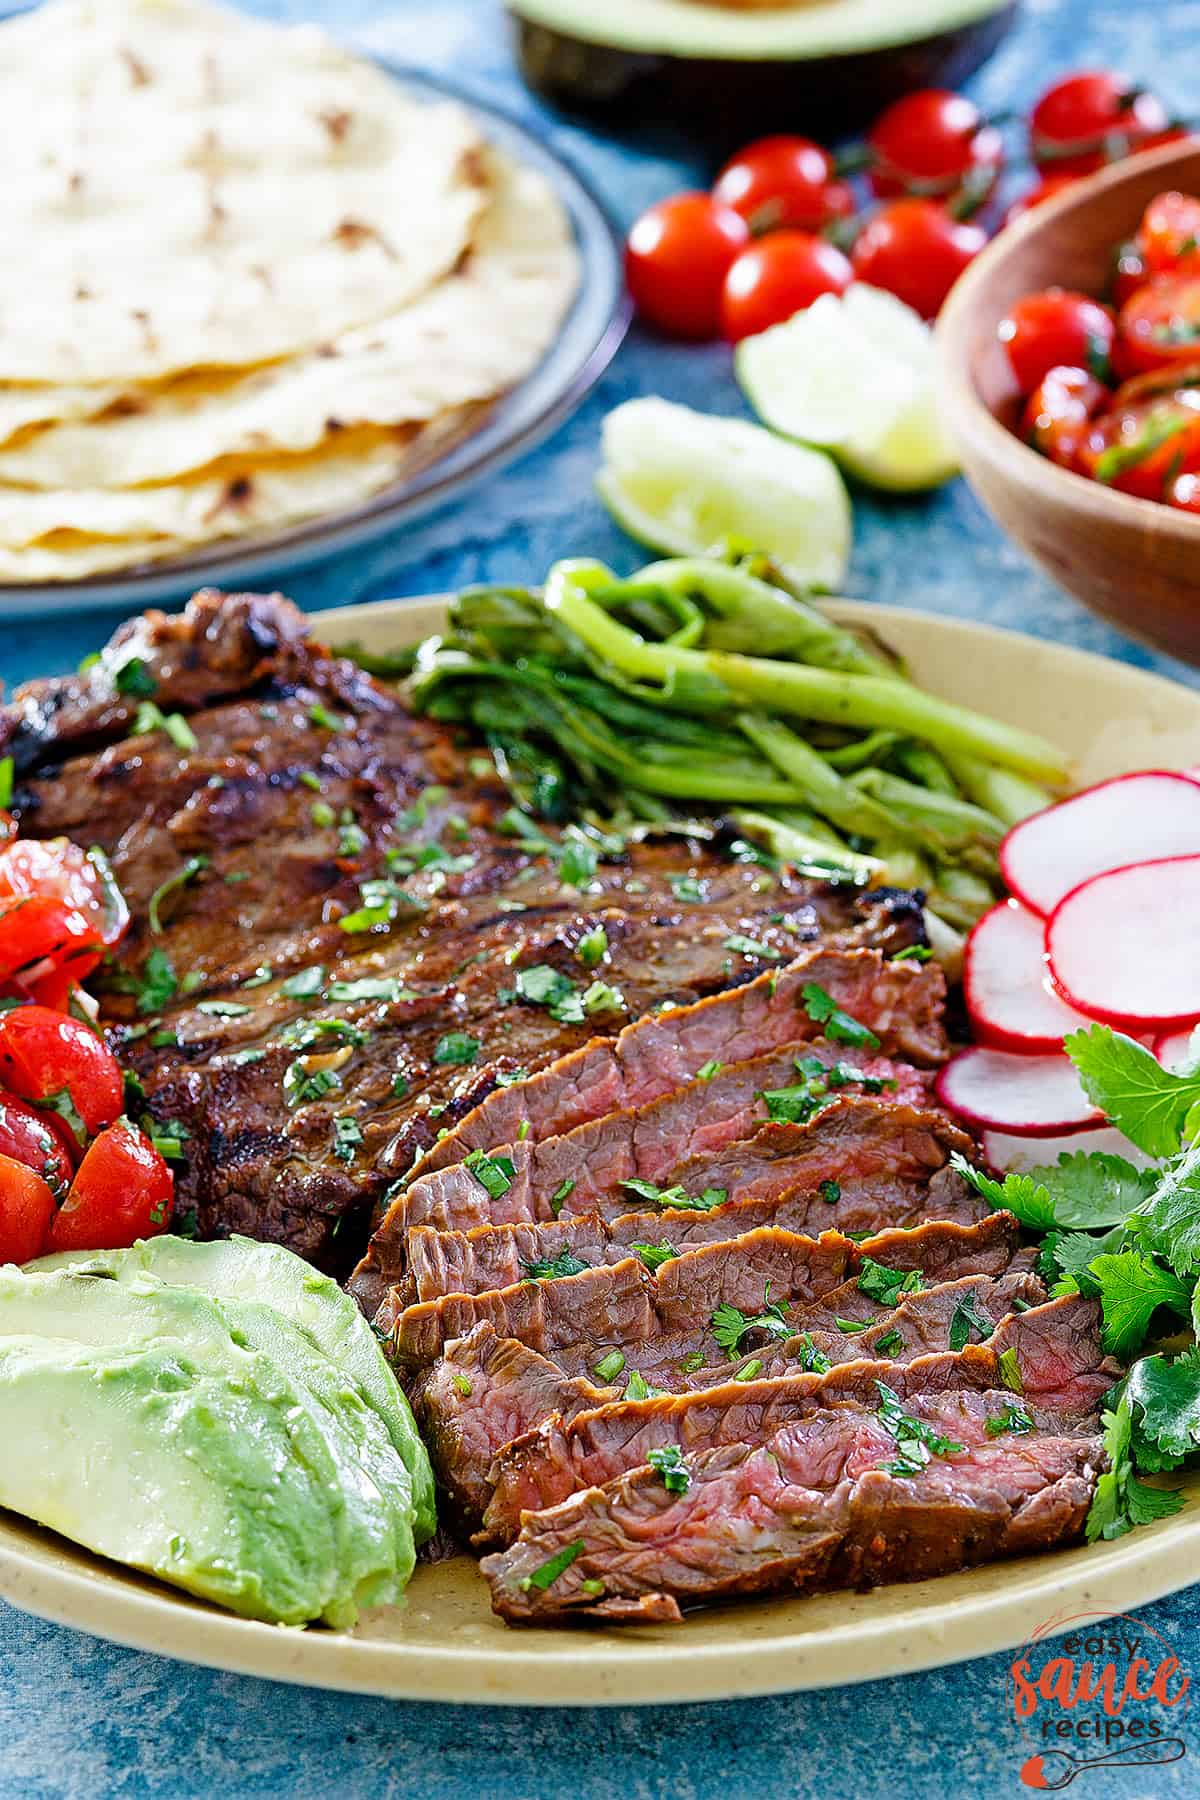 Carne asada marinated beef resting on a plate